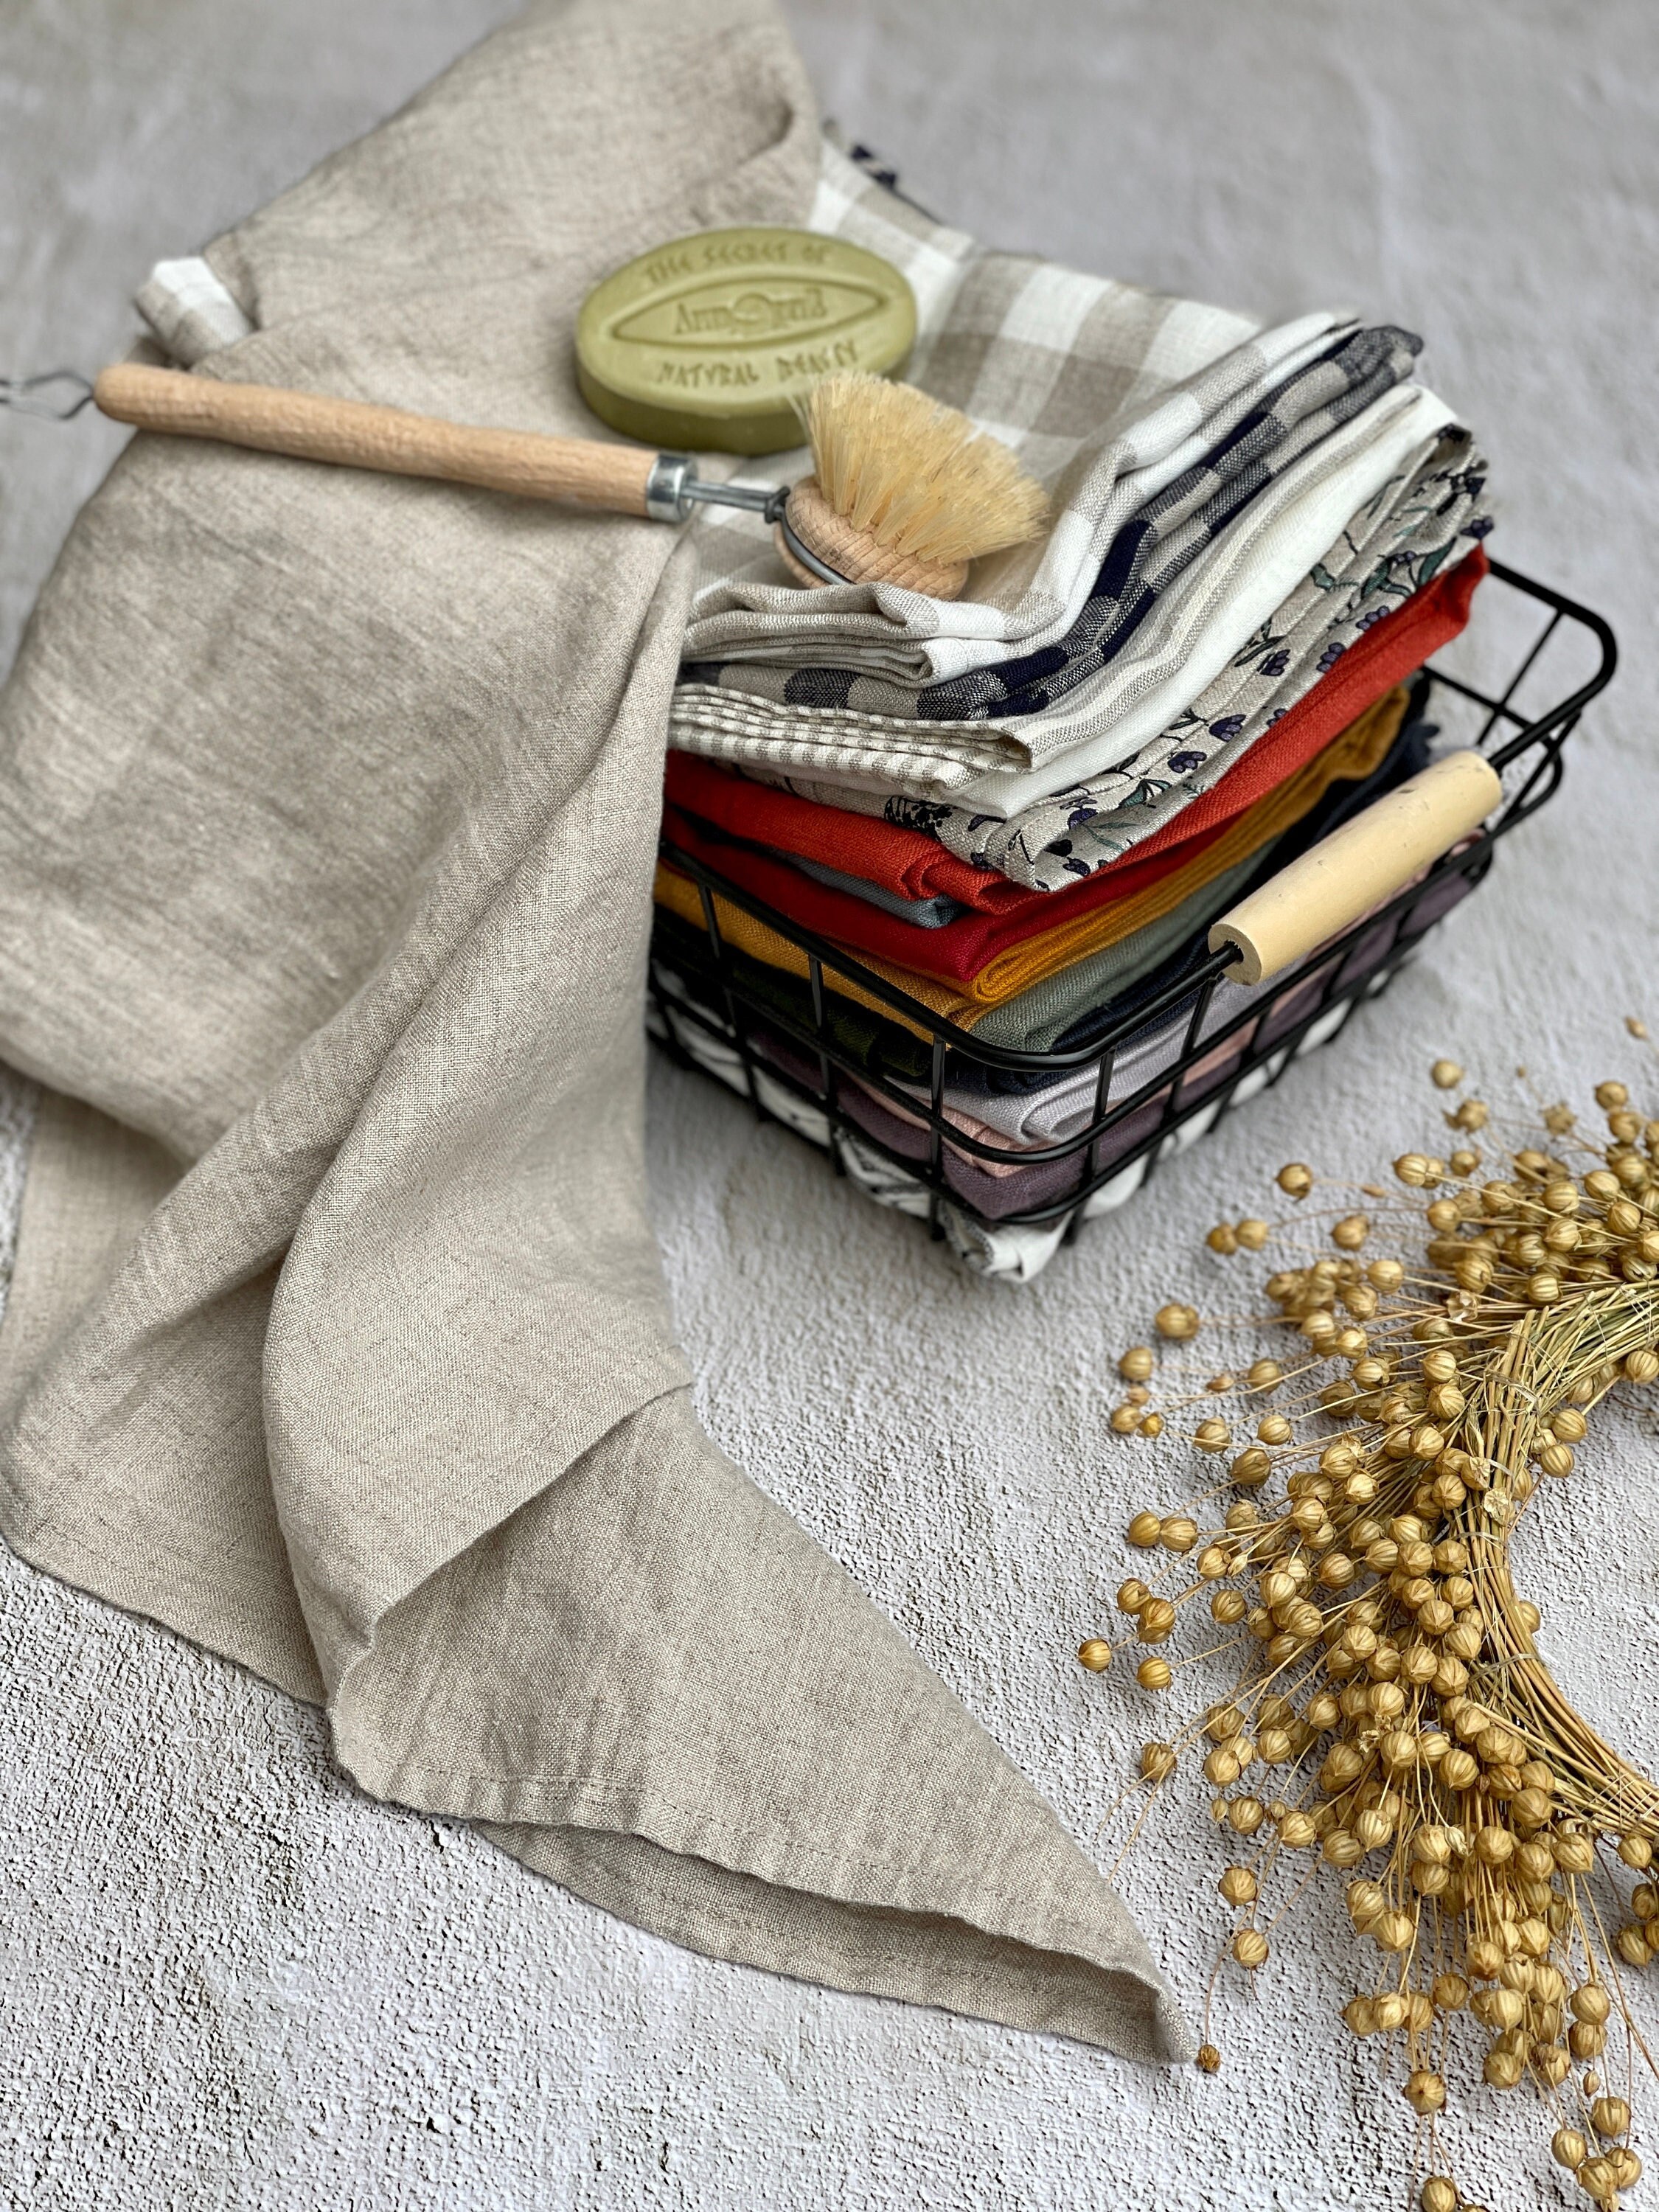  Kitchen Dish Towels, 100% Linen Super Absorbent Natural Tea  Towels Size: 20 x 27 IN, Set of 3 Soft Linen Towels in Sage Green, Natural,  Checked Colors, Handmade Gift : Handmade Products